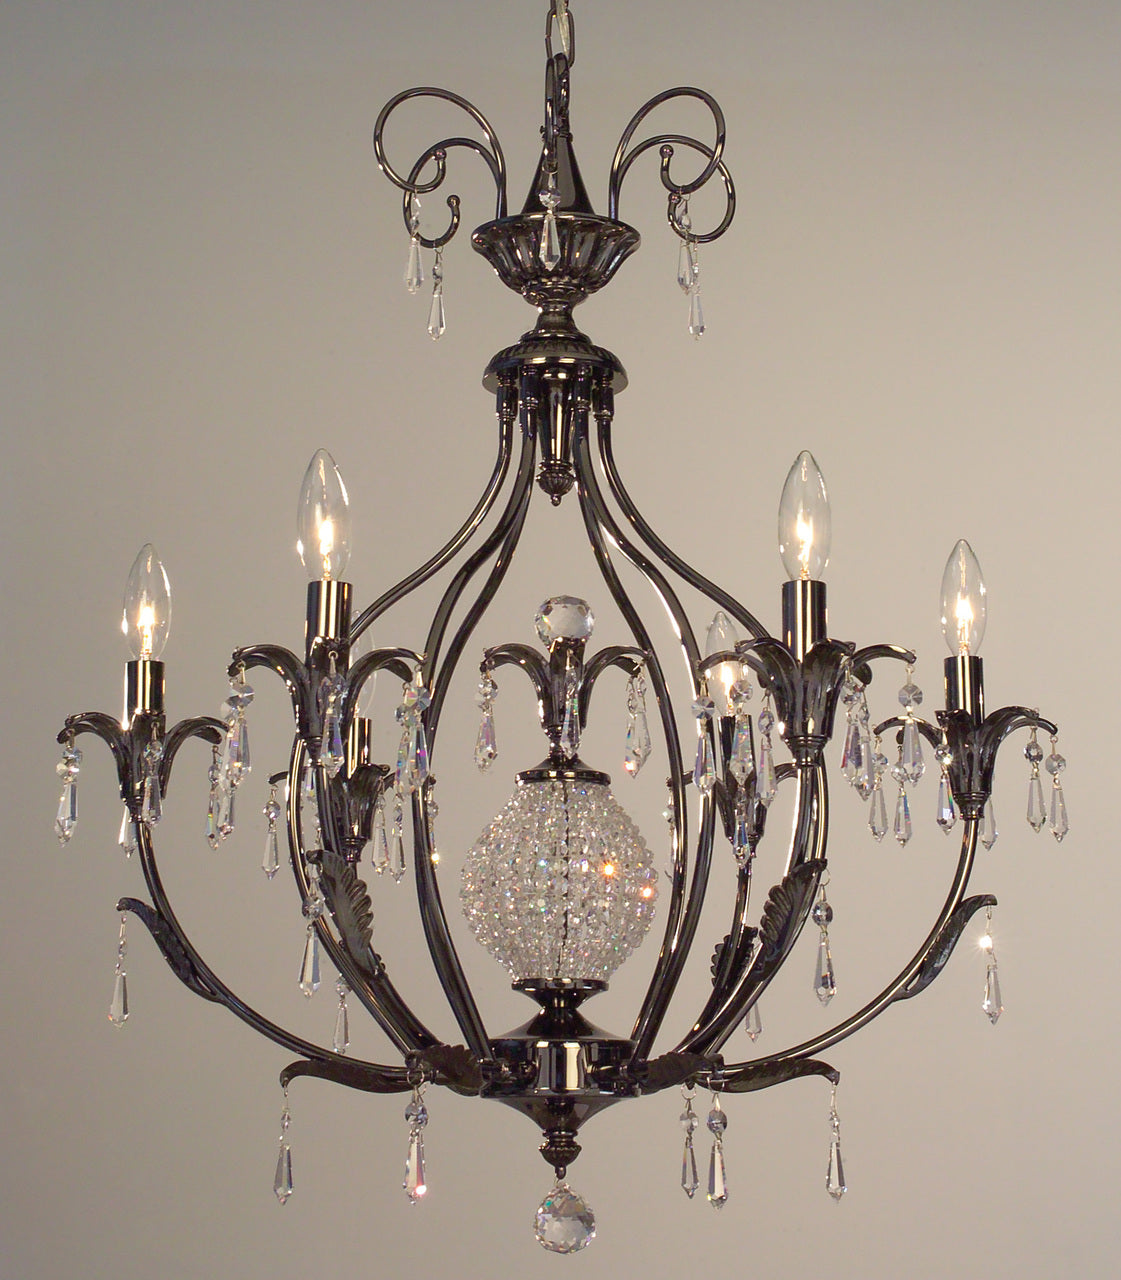 Classic Lighting 16118 ABR S Sharon Crystal Chandelier in Antique Brass